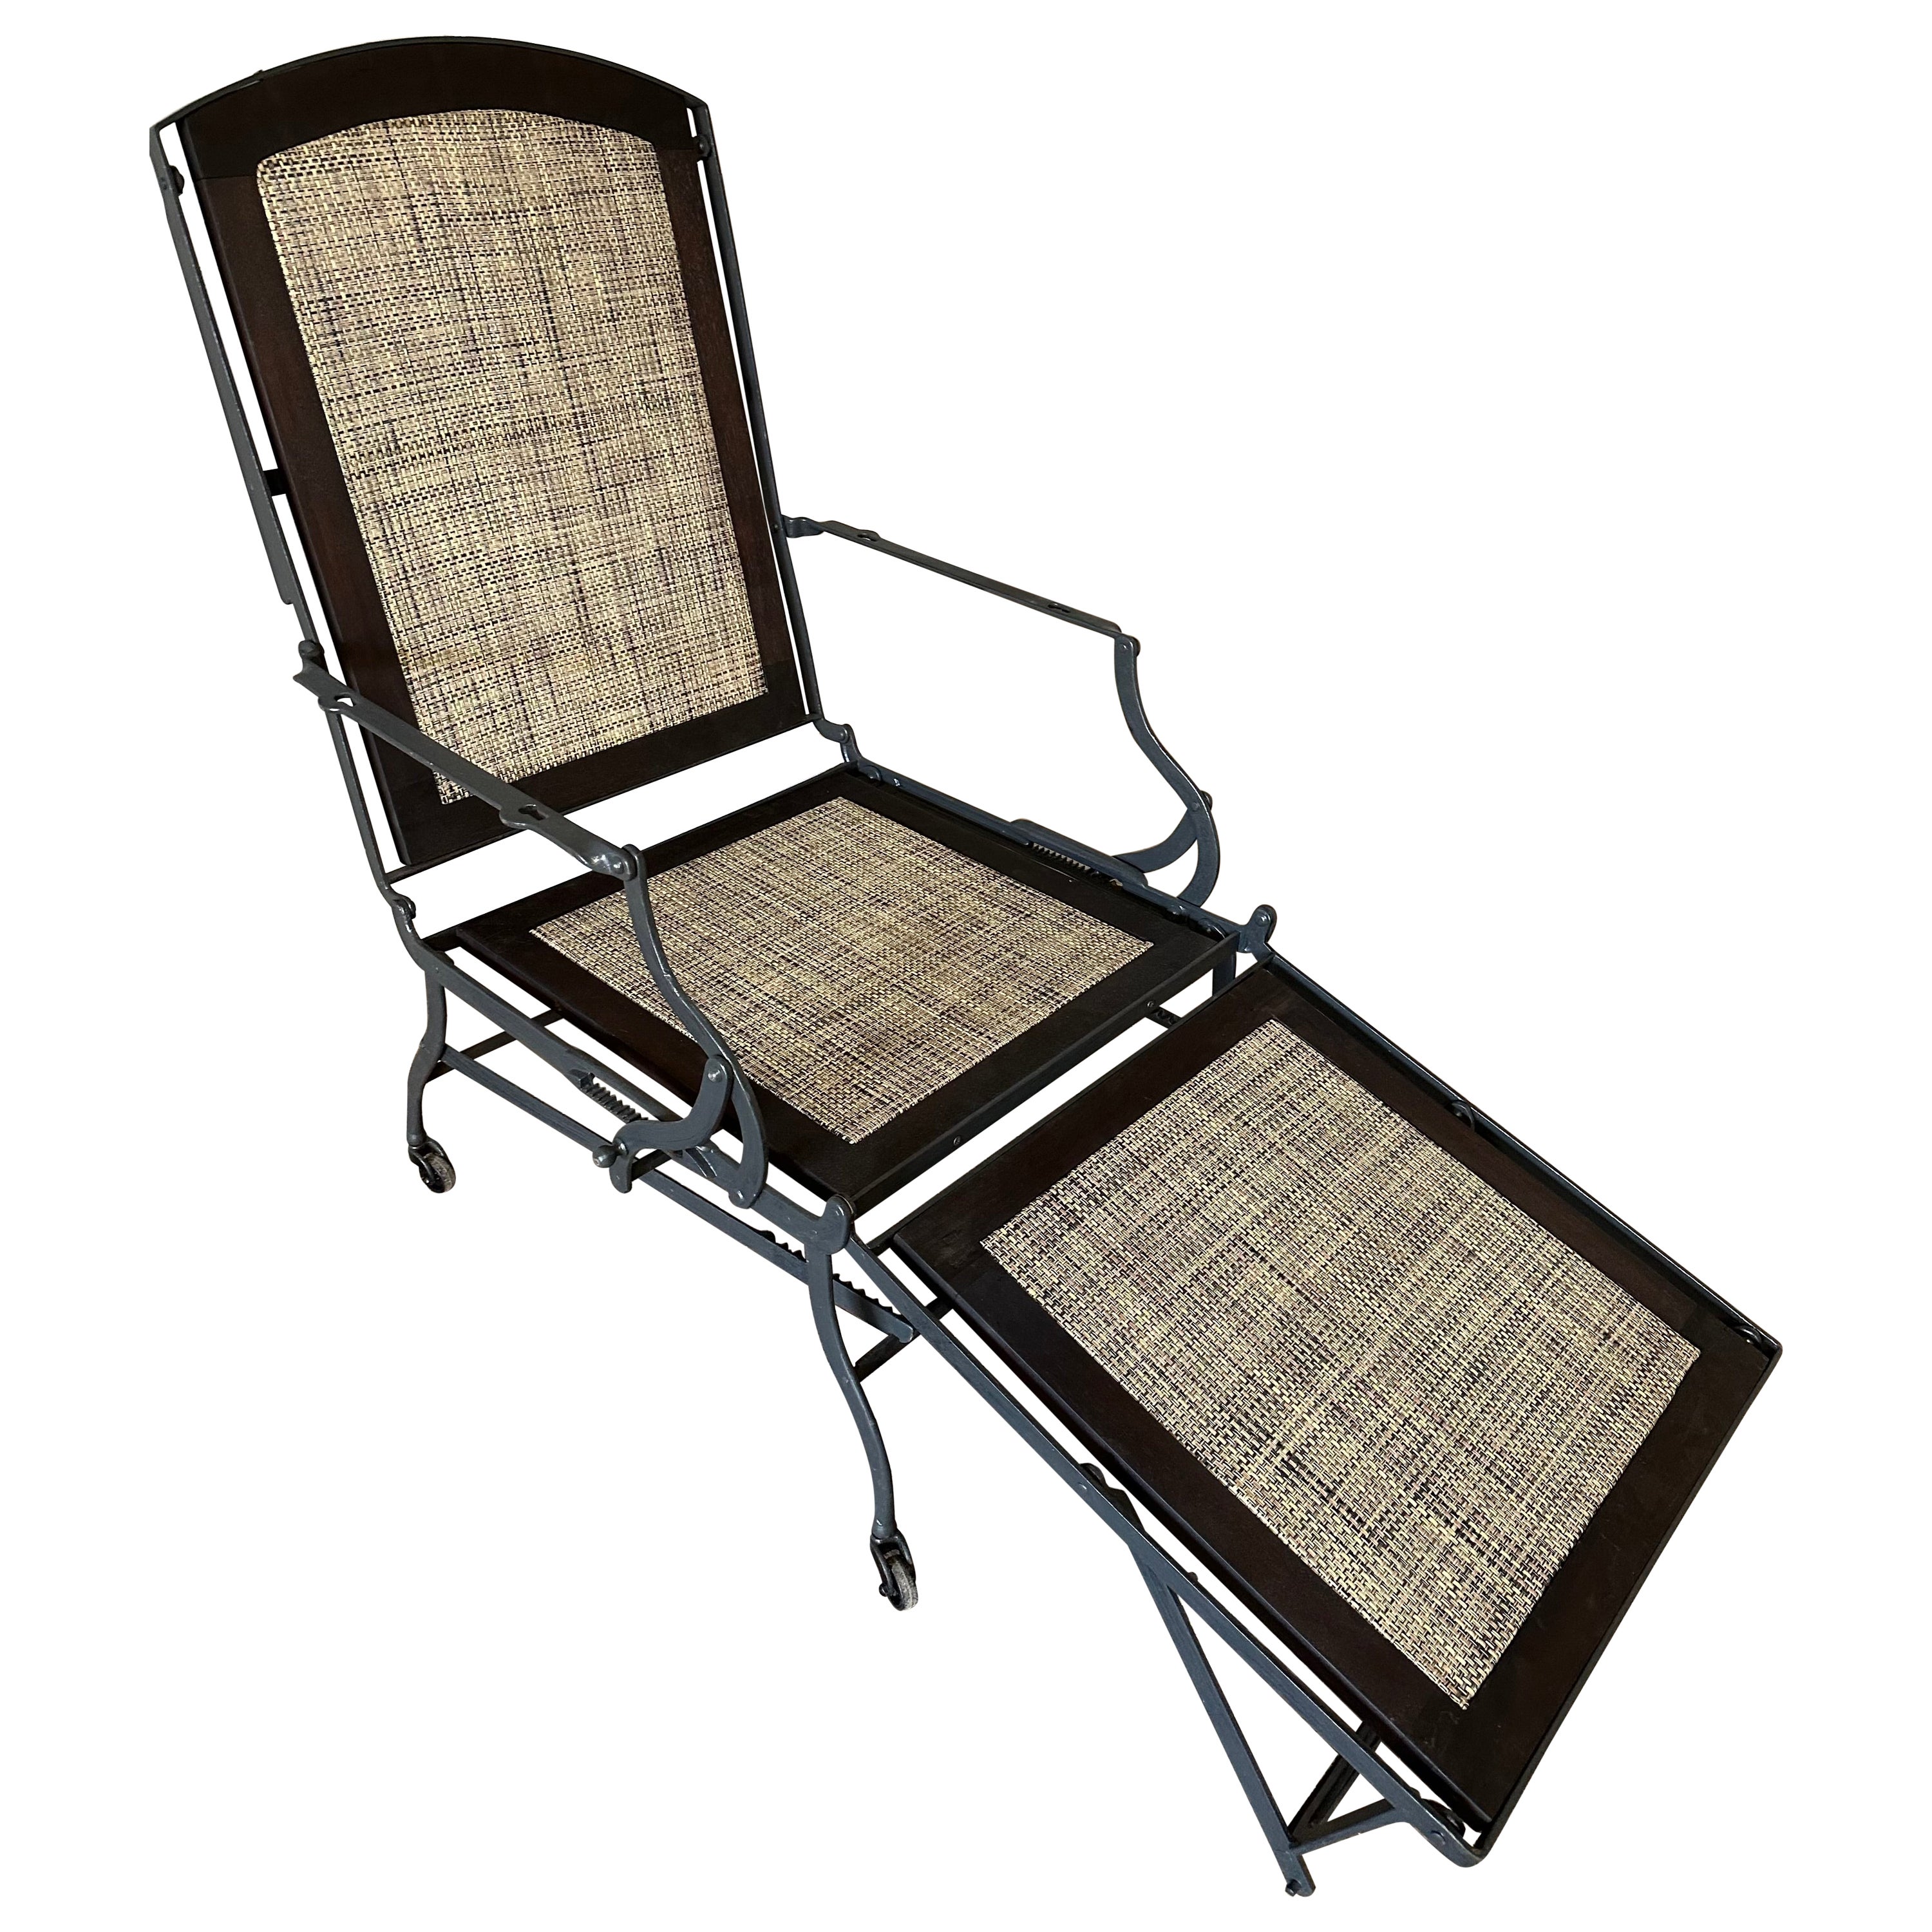 Antique Folding Lounging Deck Chair